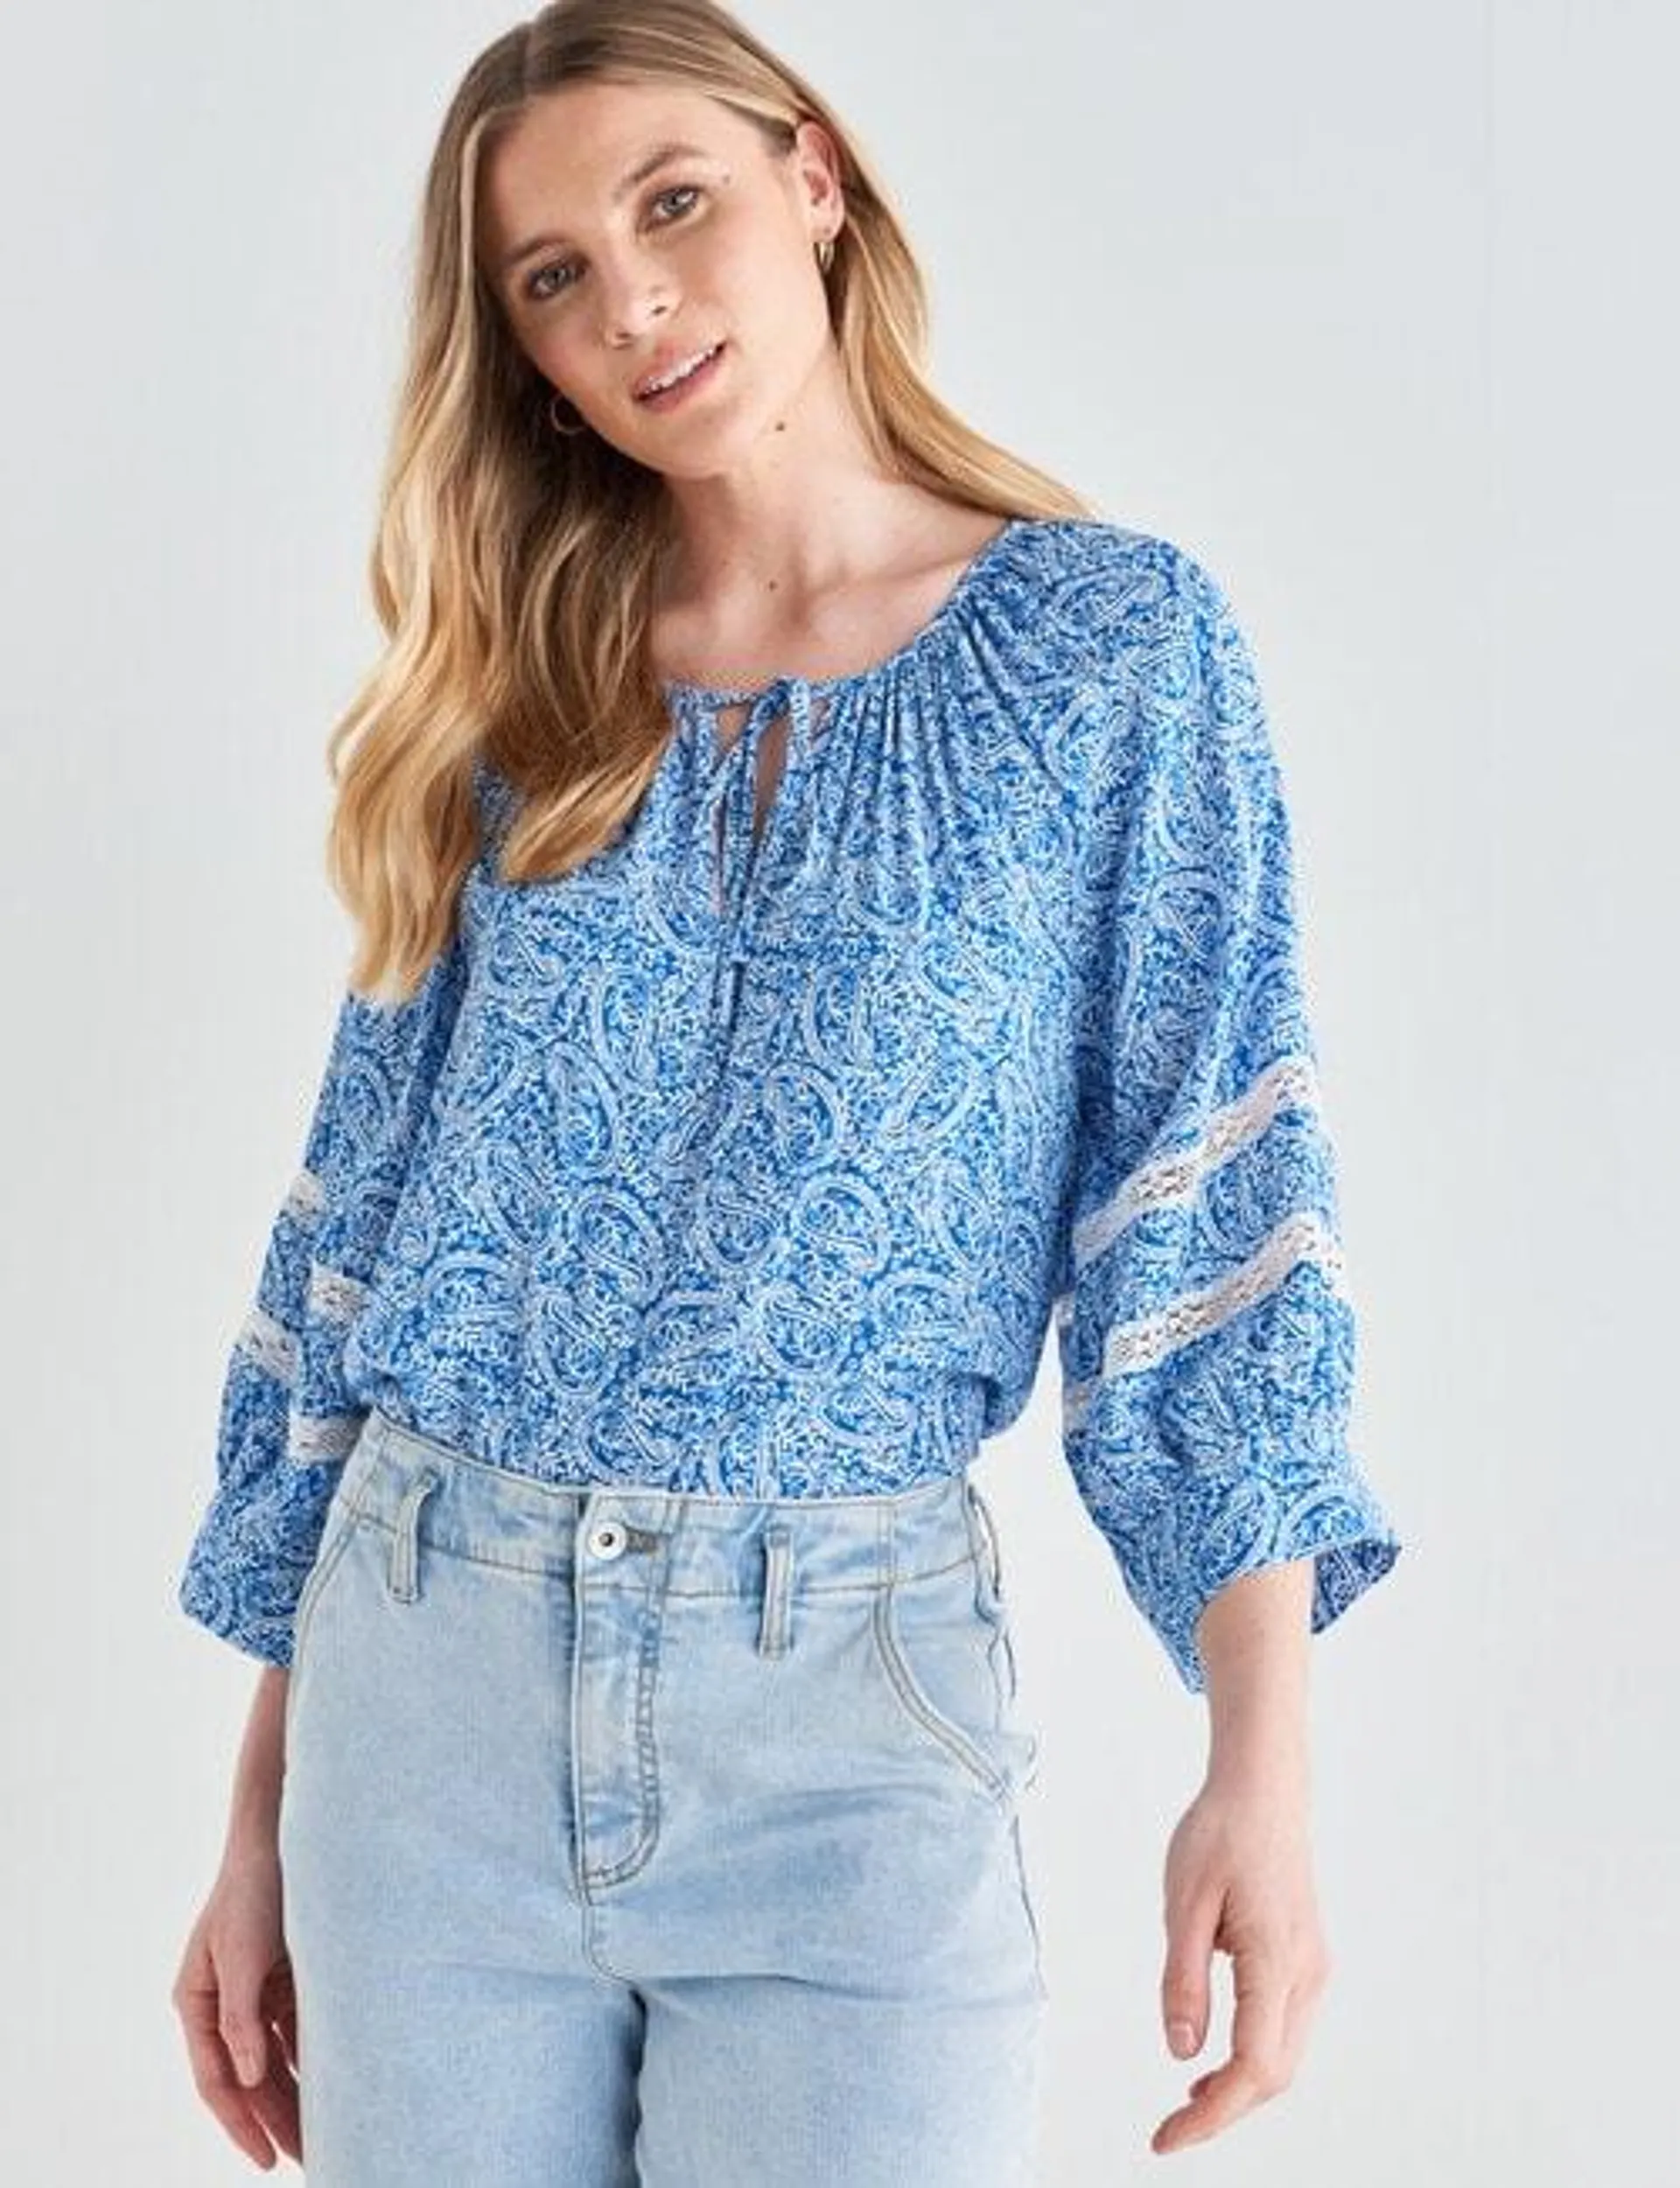 Whistle Floral Paisley 3/4 Sleeve Peasant Blouse, Azure